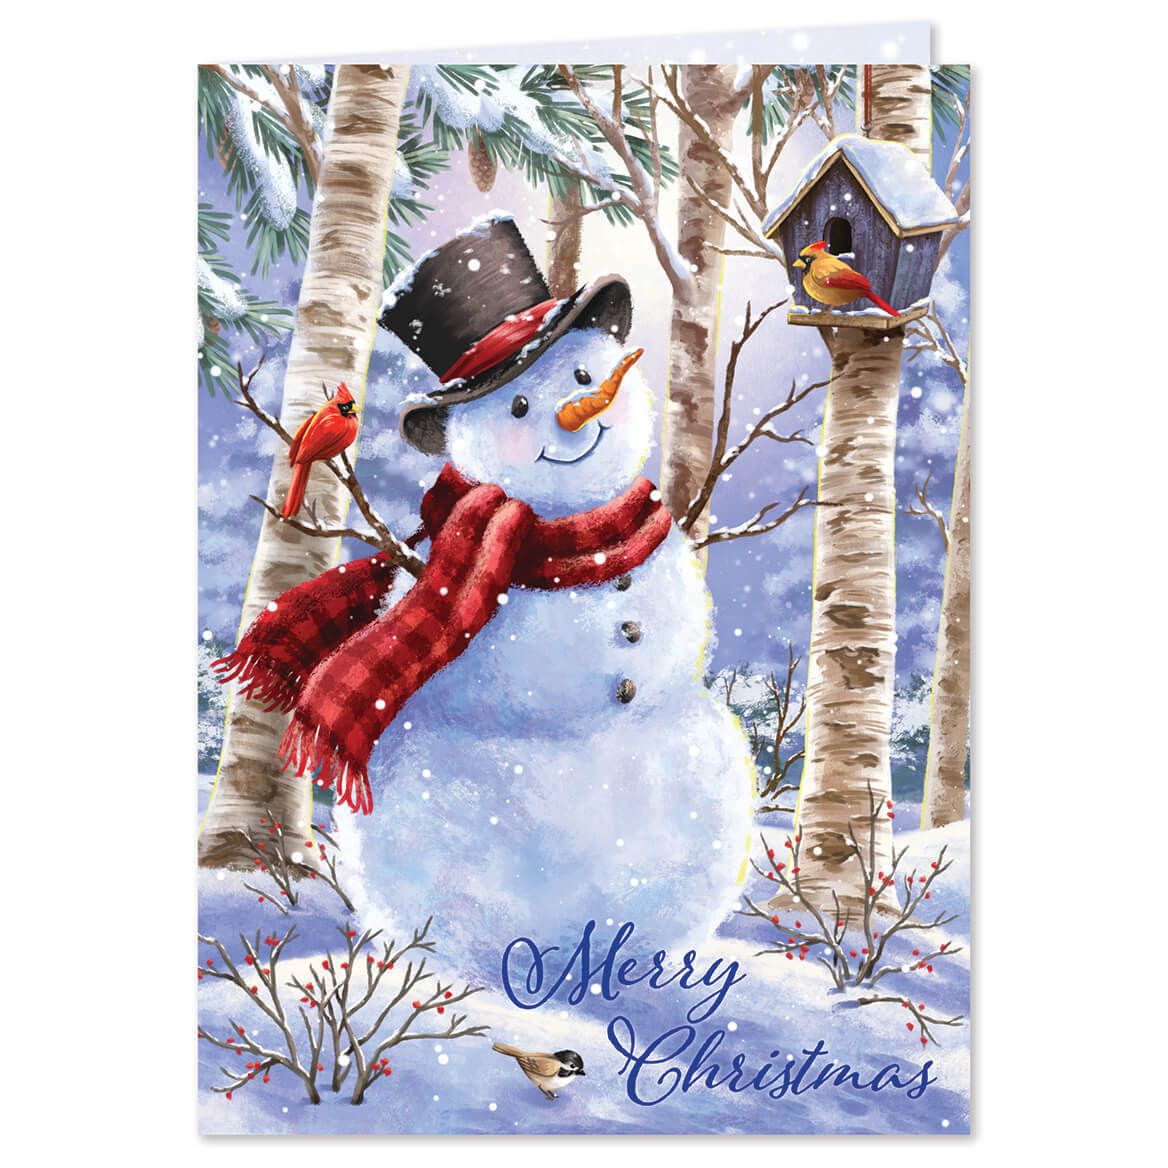 Personalized Snowman and Friends Christmas Cards, Set of 20 + '-' + 373666